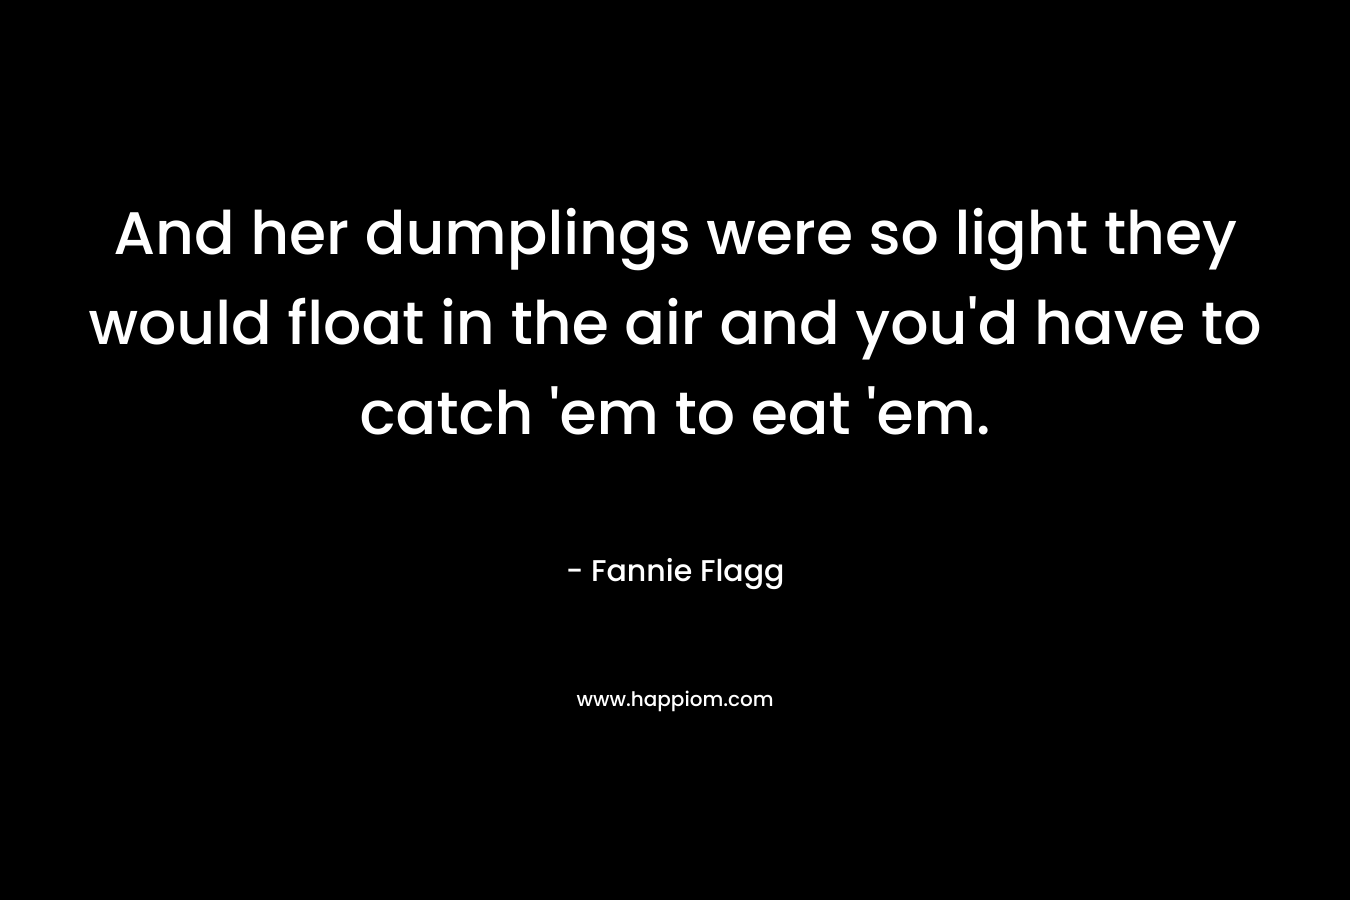 And her dumplings were so light they would float in the air and you'd have to catch 'em to eat 'em.